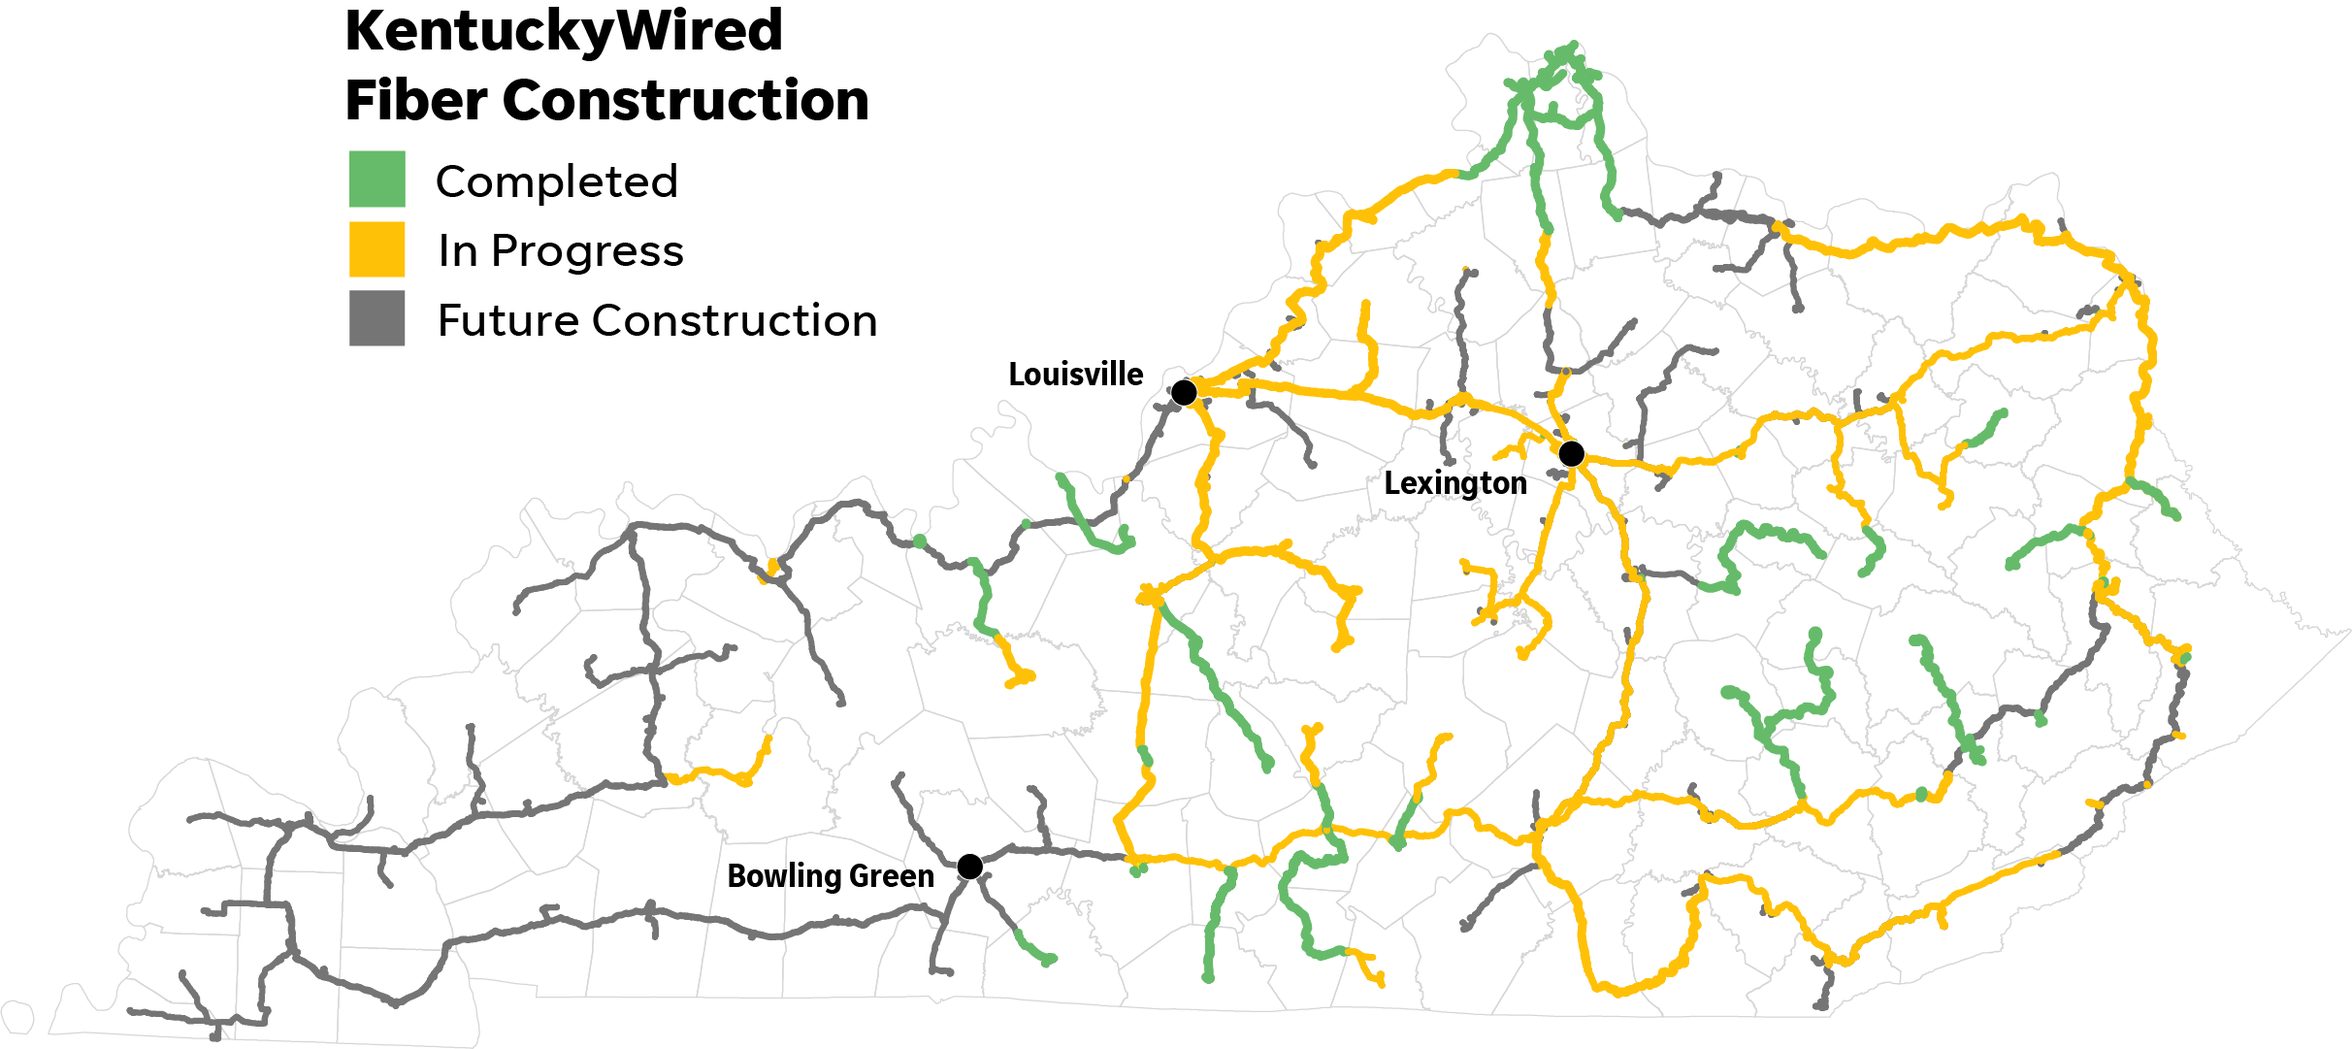 Map of the KentuckyWired fiber lines that are completed, in progress and are part of future construction in Kentucky